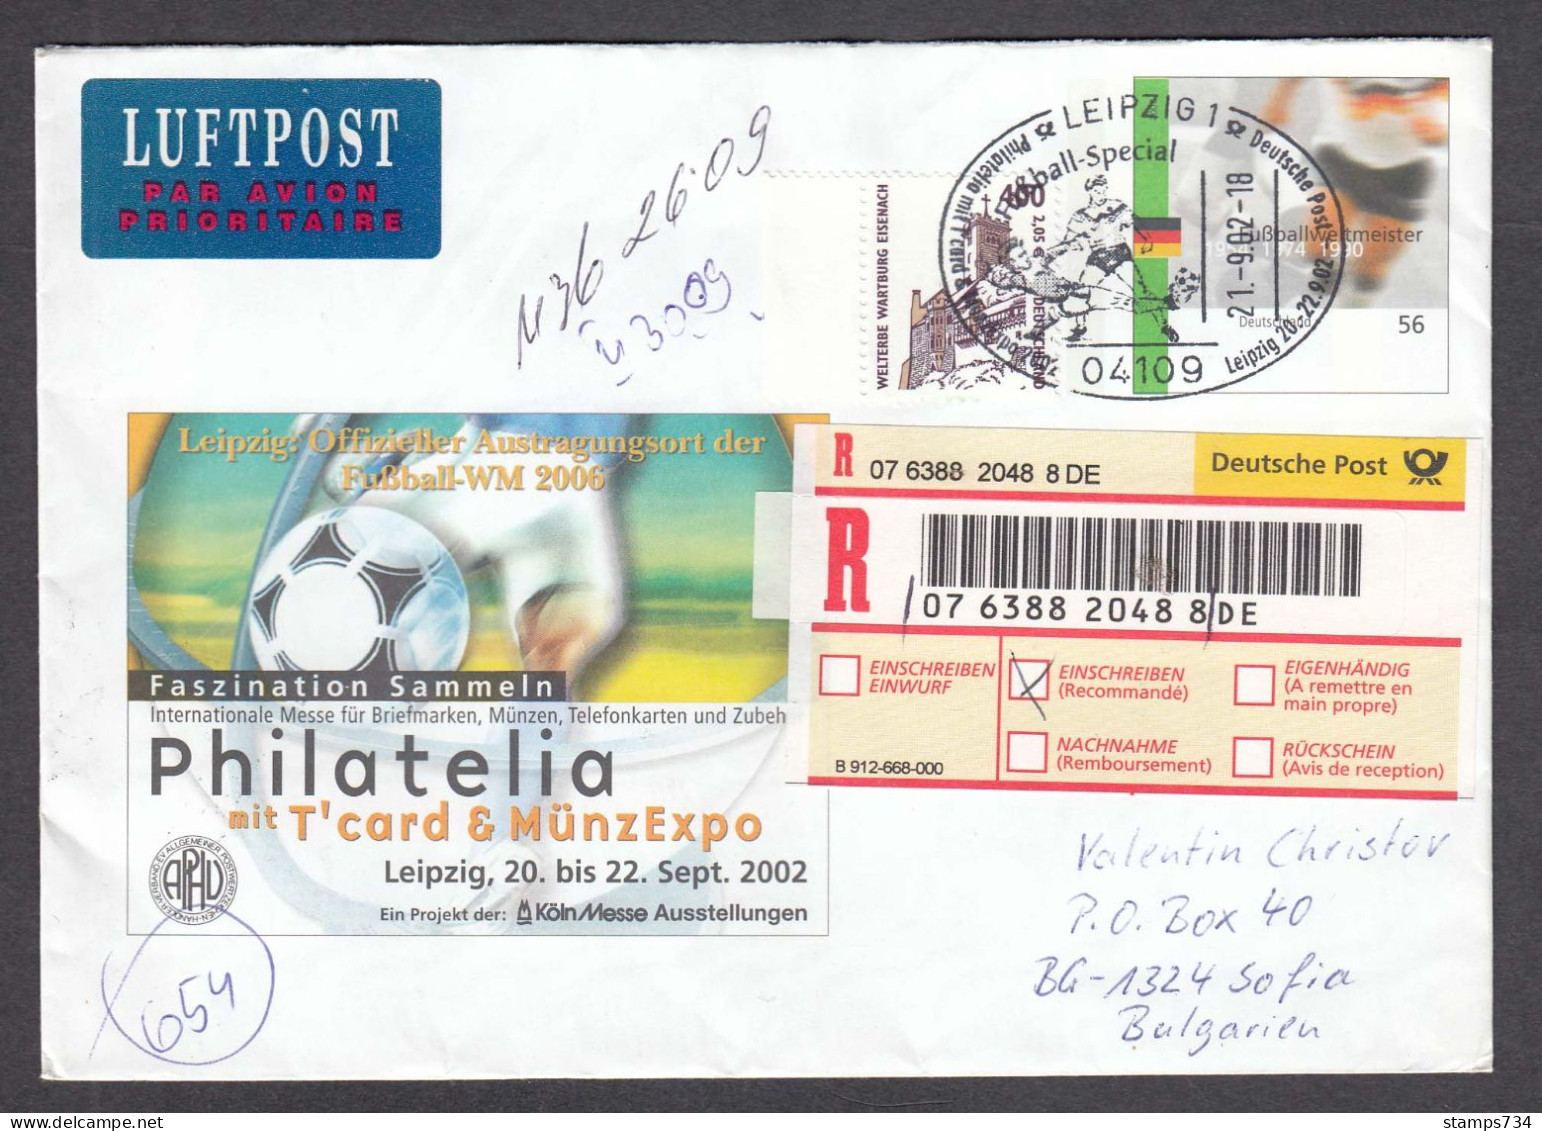 BRD 24/2002 - 56 C(Football), Philatelia With T'card & Coin Expo, Post. Stationery With Spec. Cancelation, Travel - Enveloppes - Oblitérées